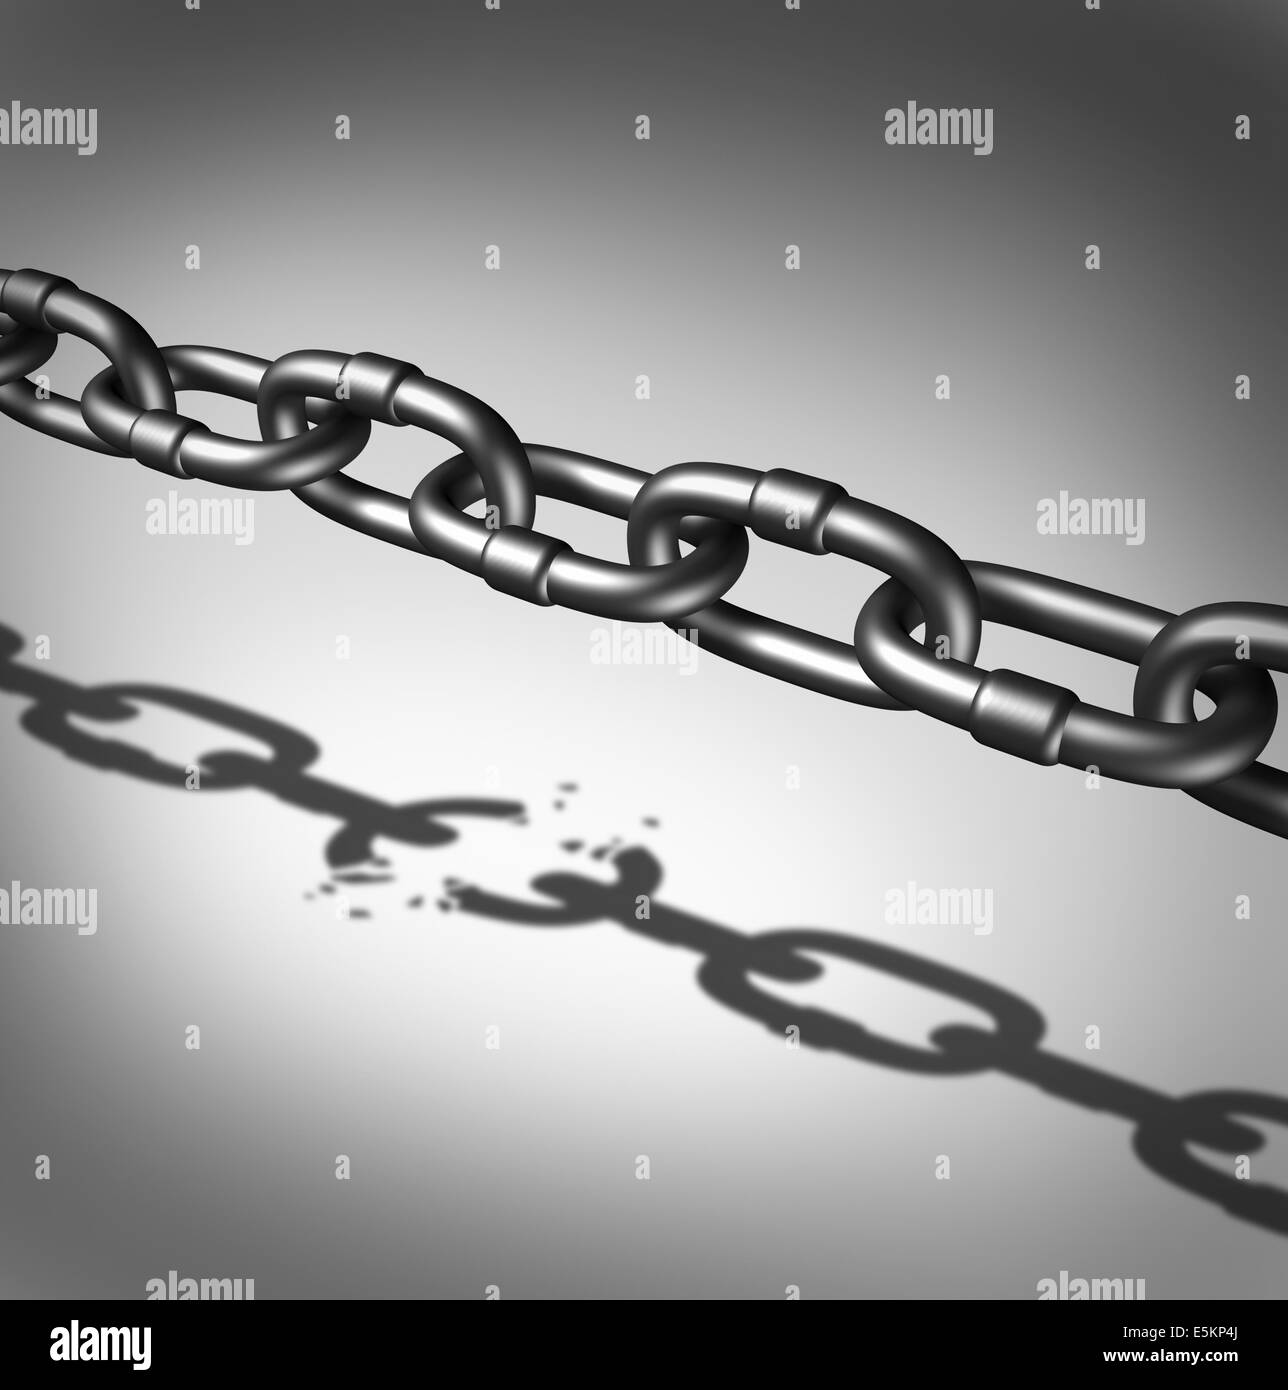 Link breaking and broken chain business concept as iron chains casting a shadow of a broken connection as a metaphor for freedom and the dreams and hopes of breaking out for success. Stock Photo